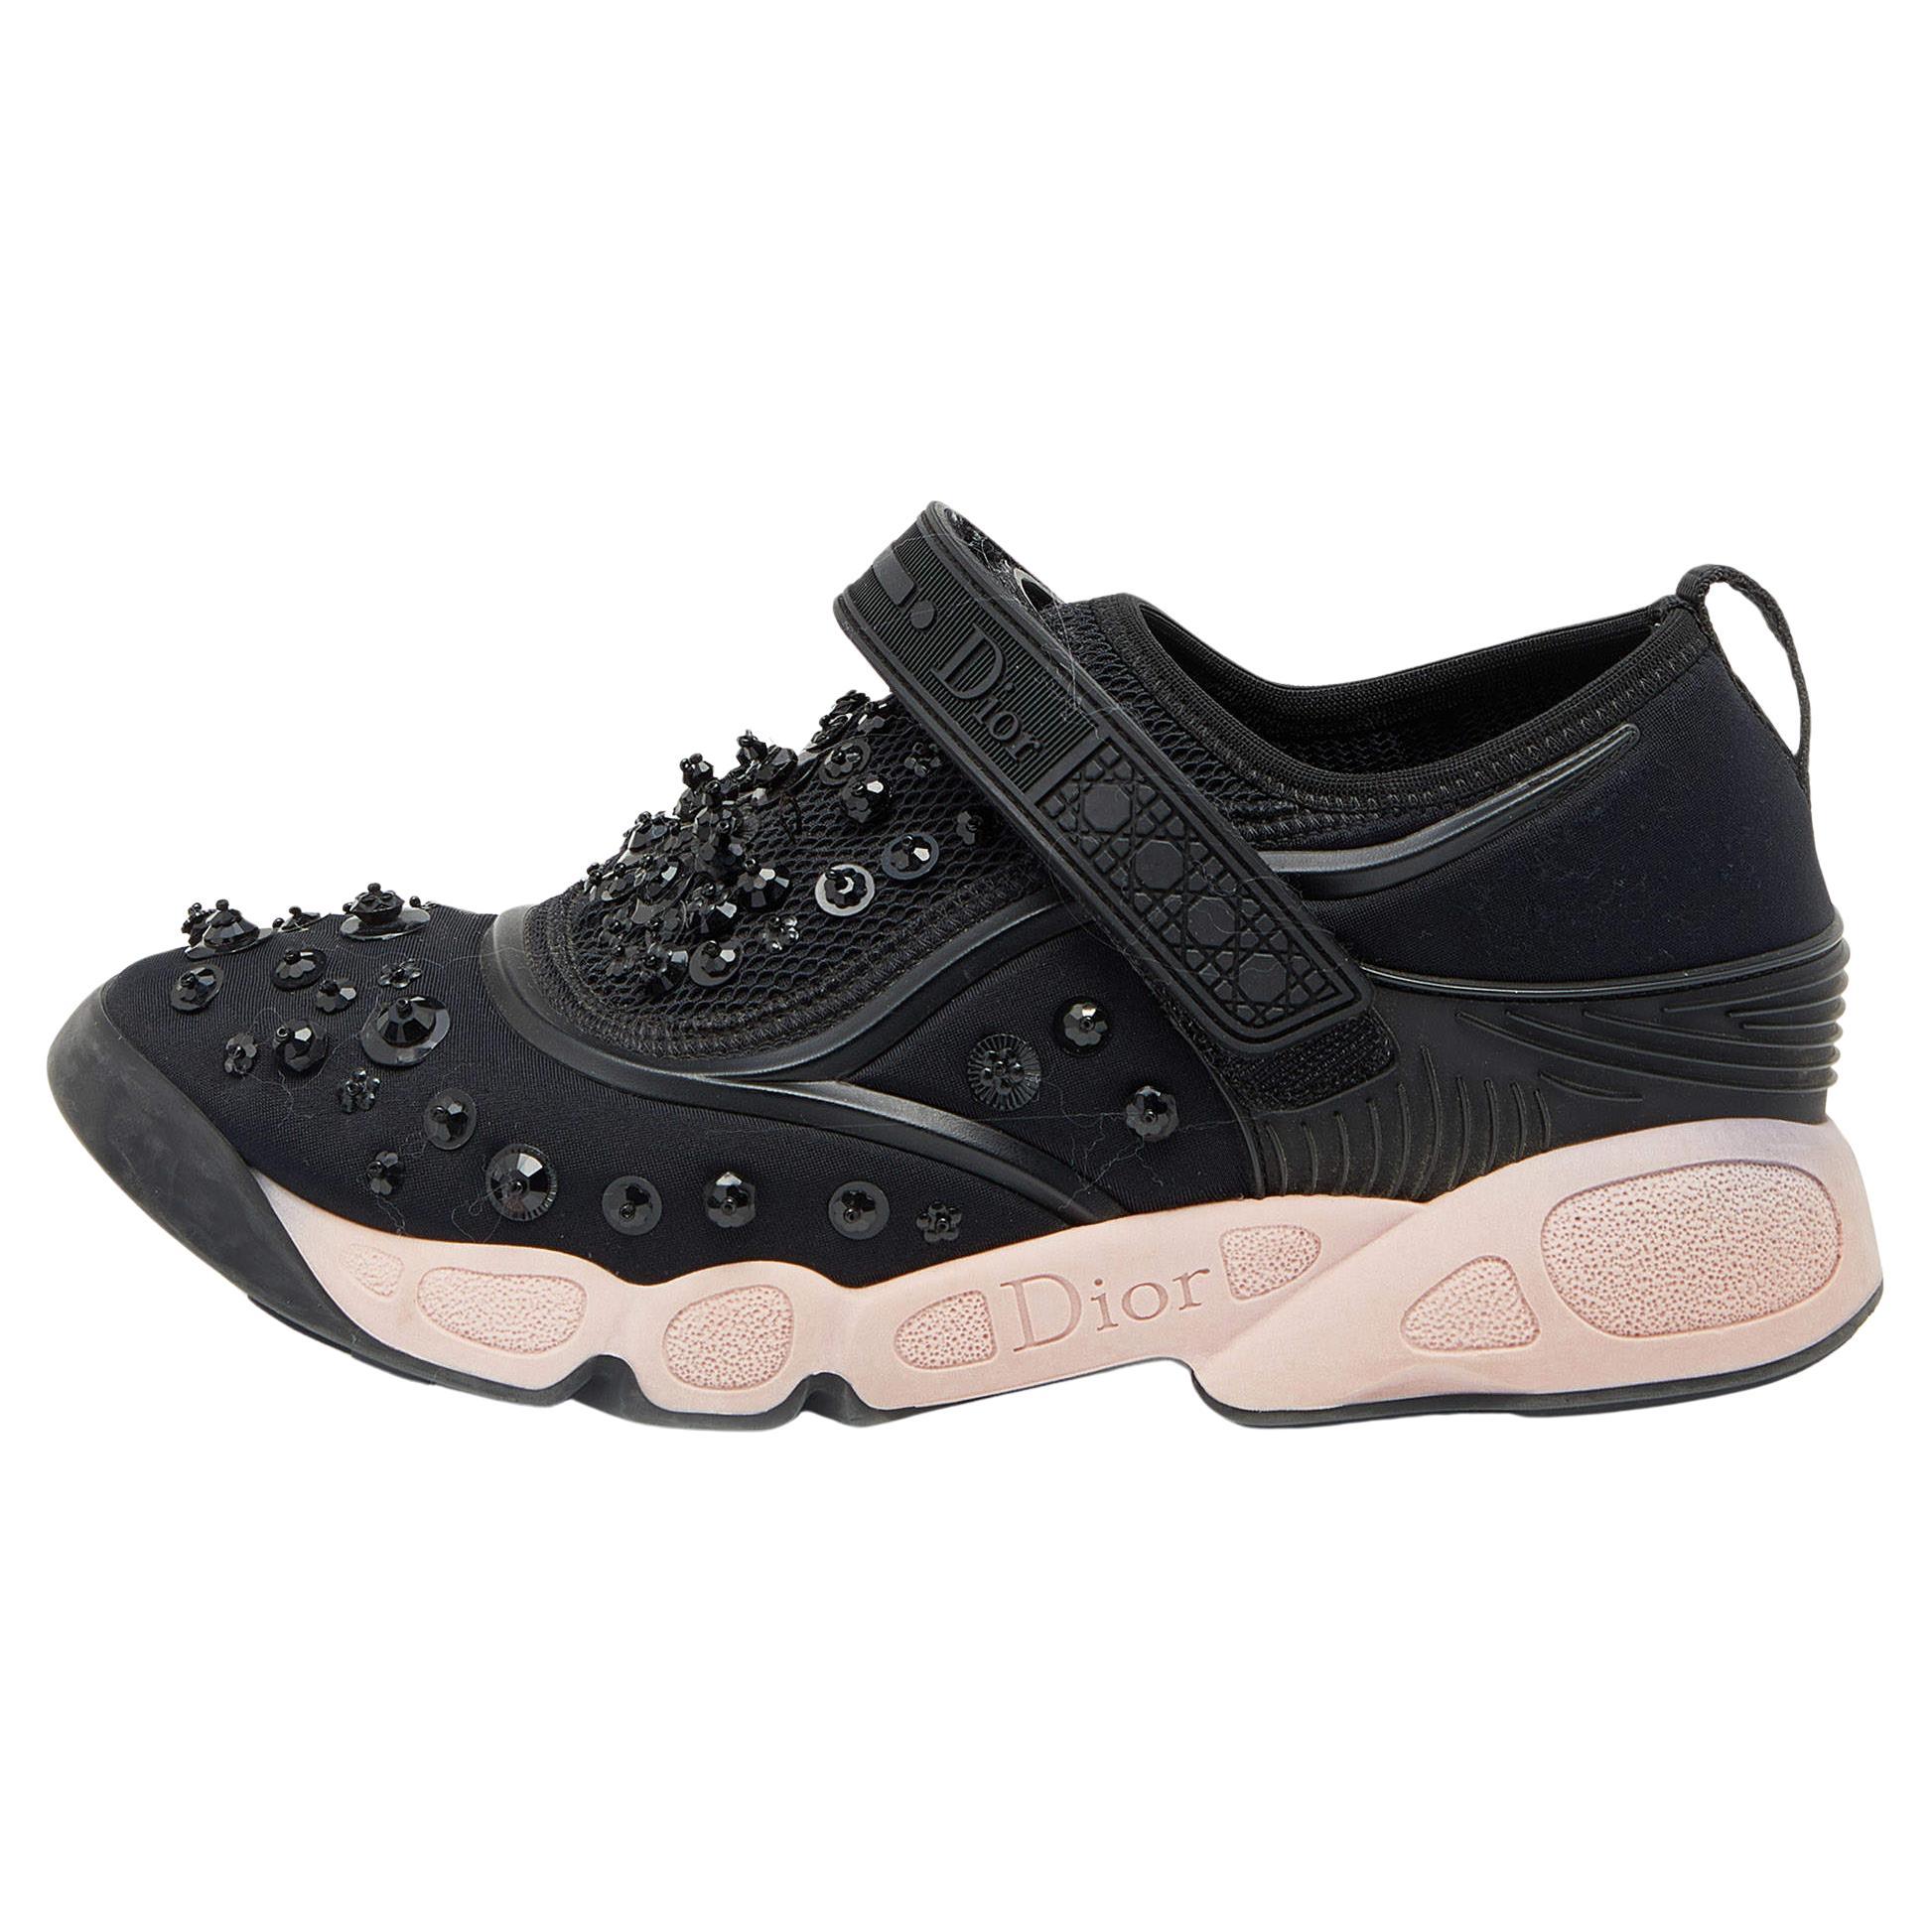 Dior Black Neoprene And Mesh Fusion Embellished Velcro Strap Sneakers Size 36 For Sale